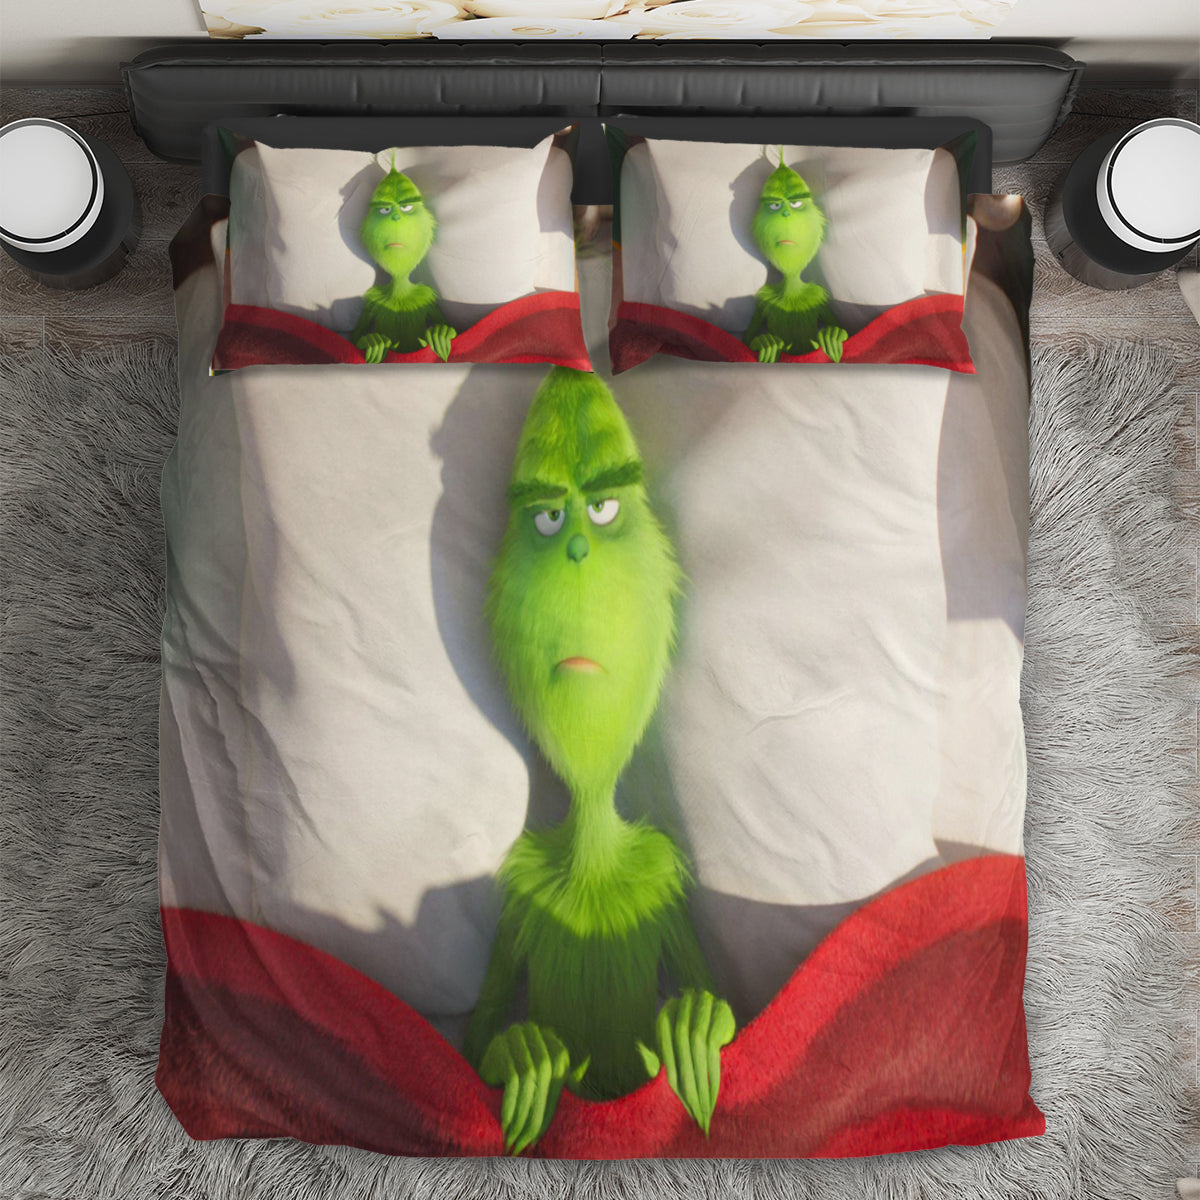 The Grinch Christmas Grinch Sleeping 1 3PCS Bedding Set Duvet Cover And Pillow Cases Gift For Fan